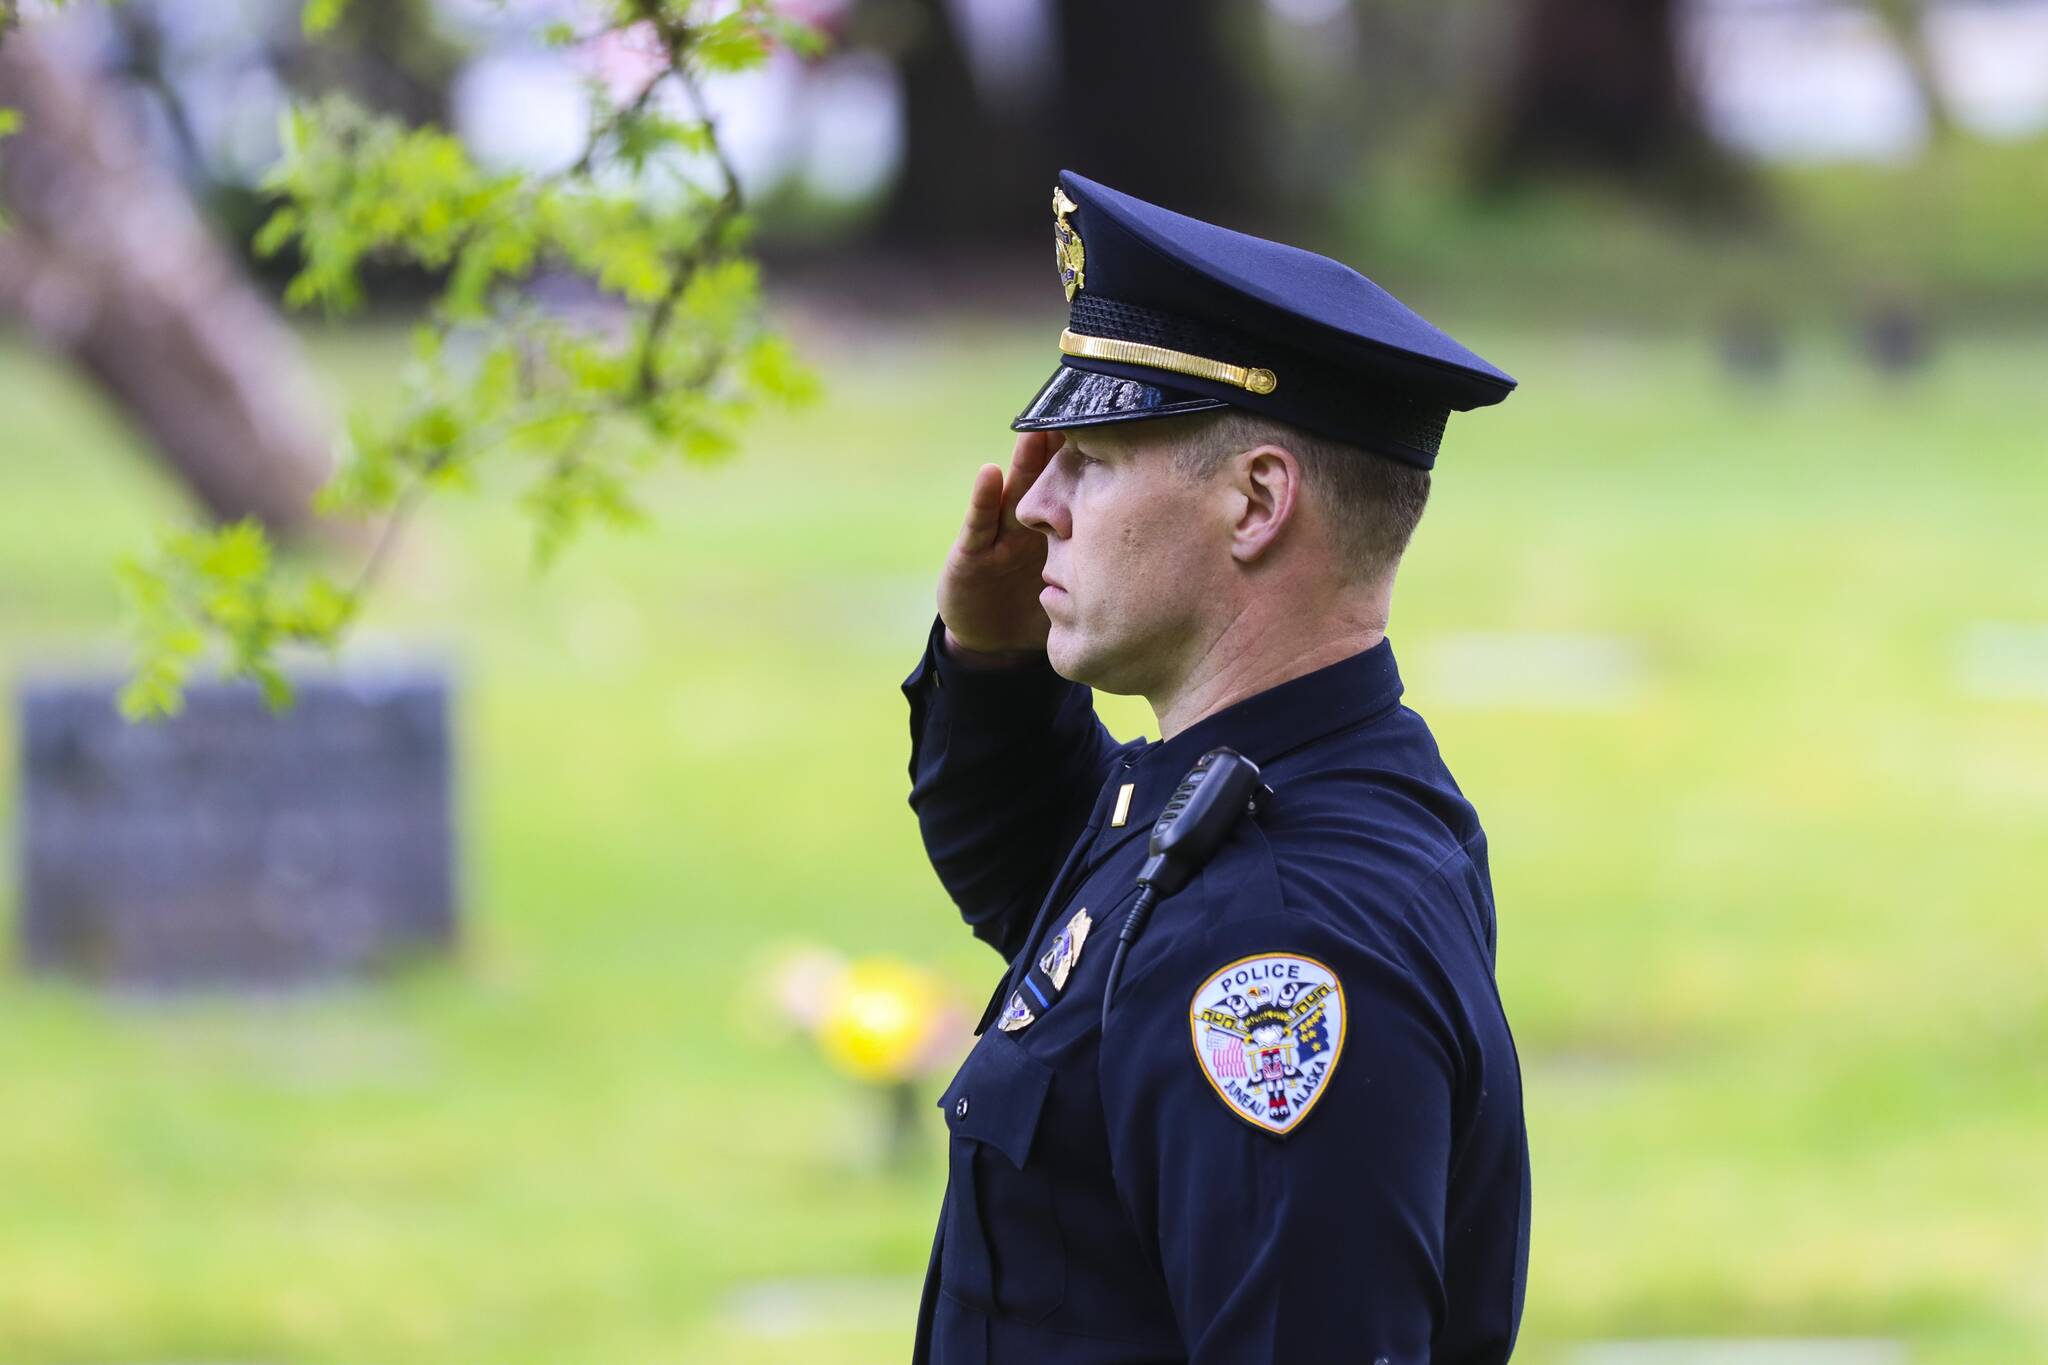 Michael S. Lockett / Juneau Empire
Lt. Krag Campbell of the Juneau Police Department salutes as officers lay a wreath on the grave of an officer who was killed on duty during a Peace Officers Memorial Day ceremony at Evergreen Cemetery on May 13, 2022.